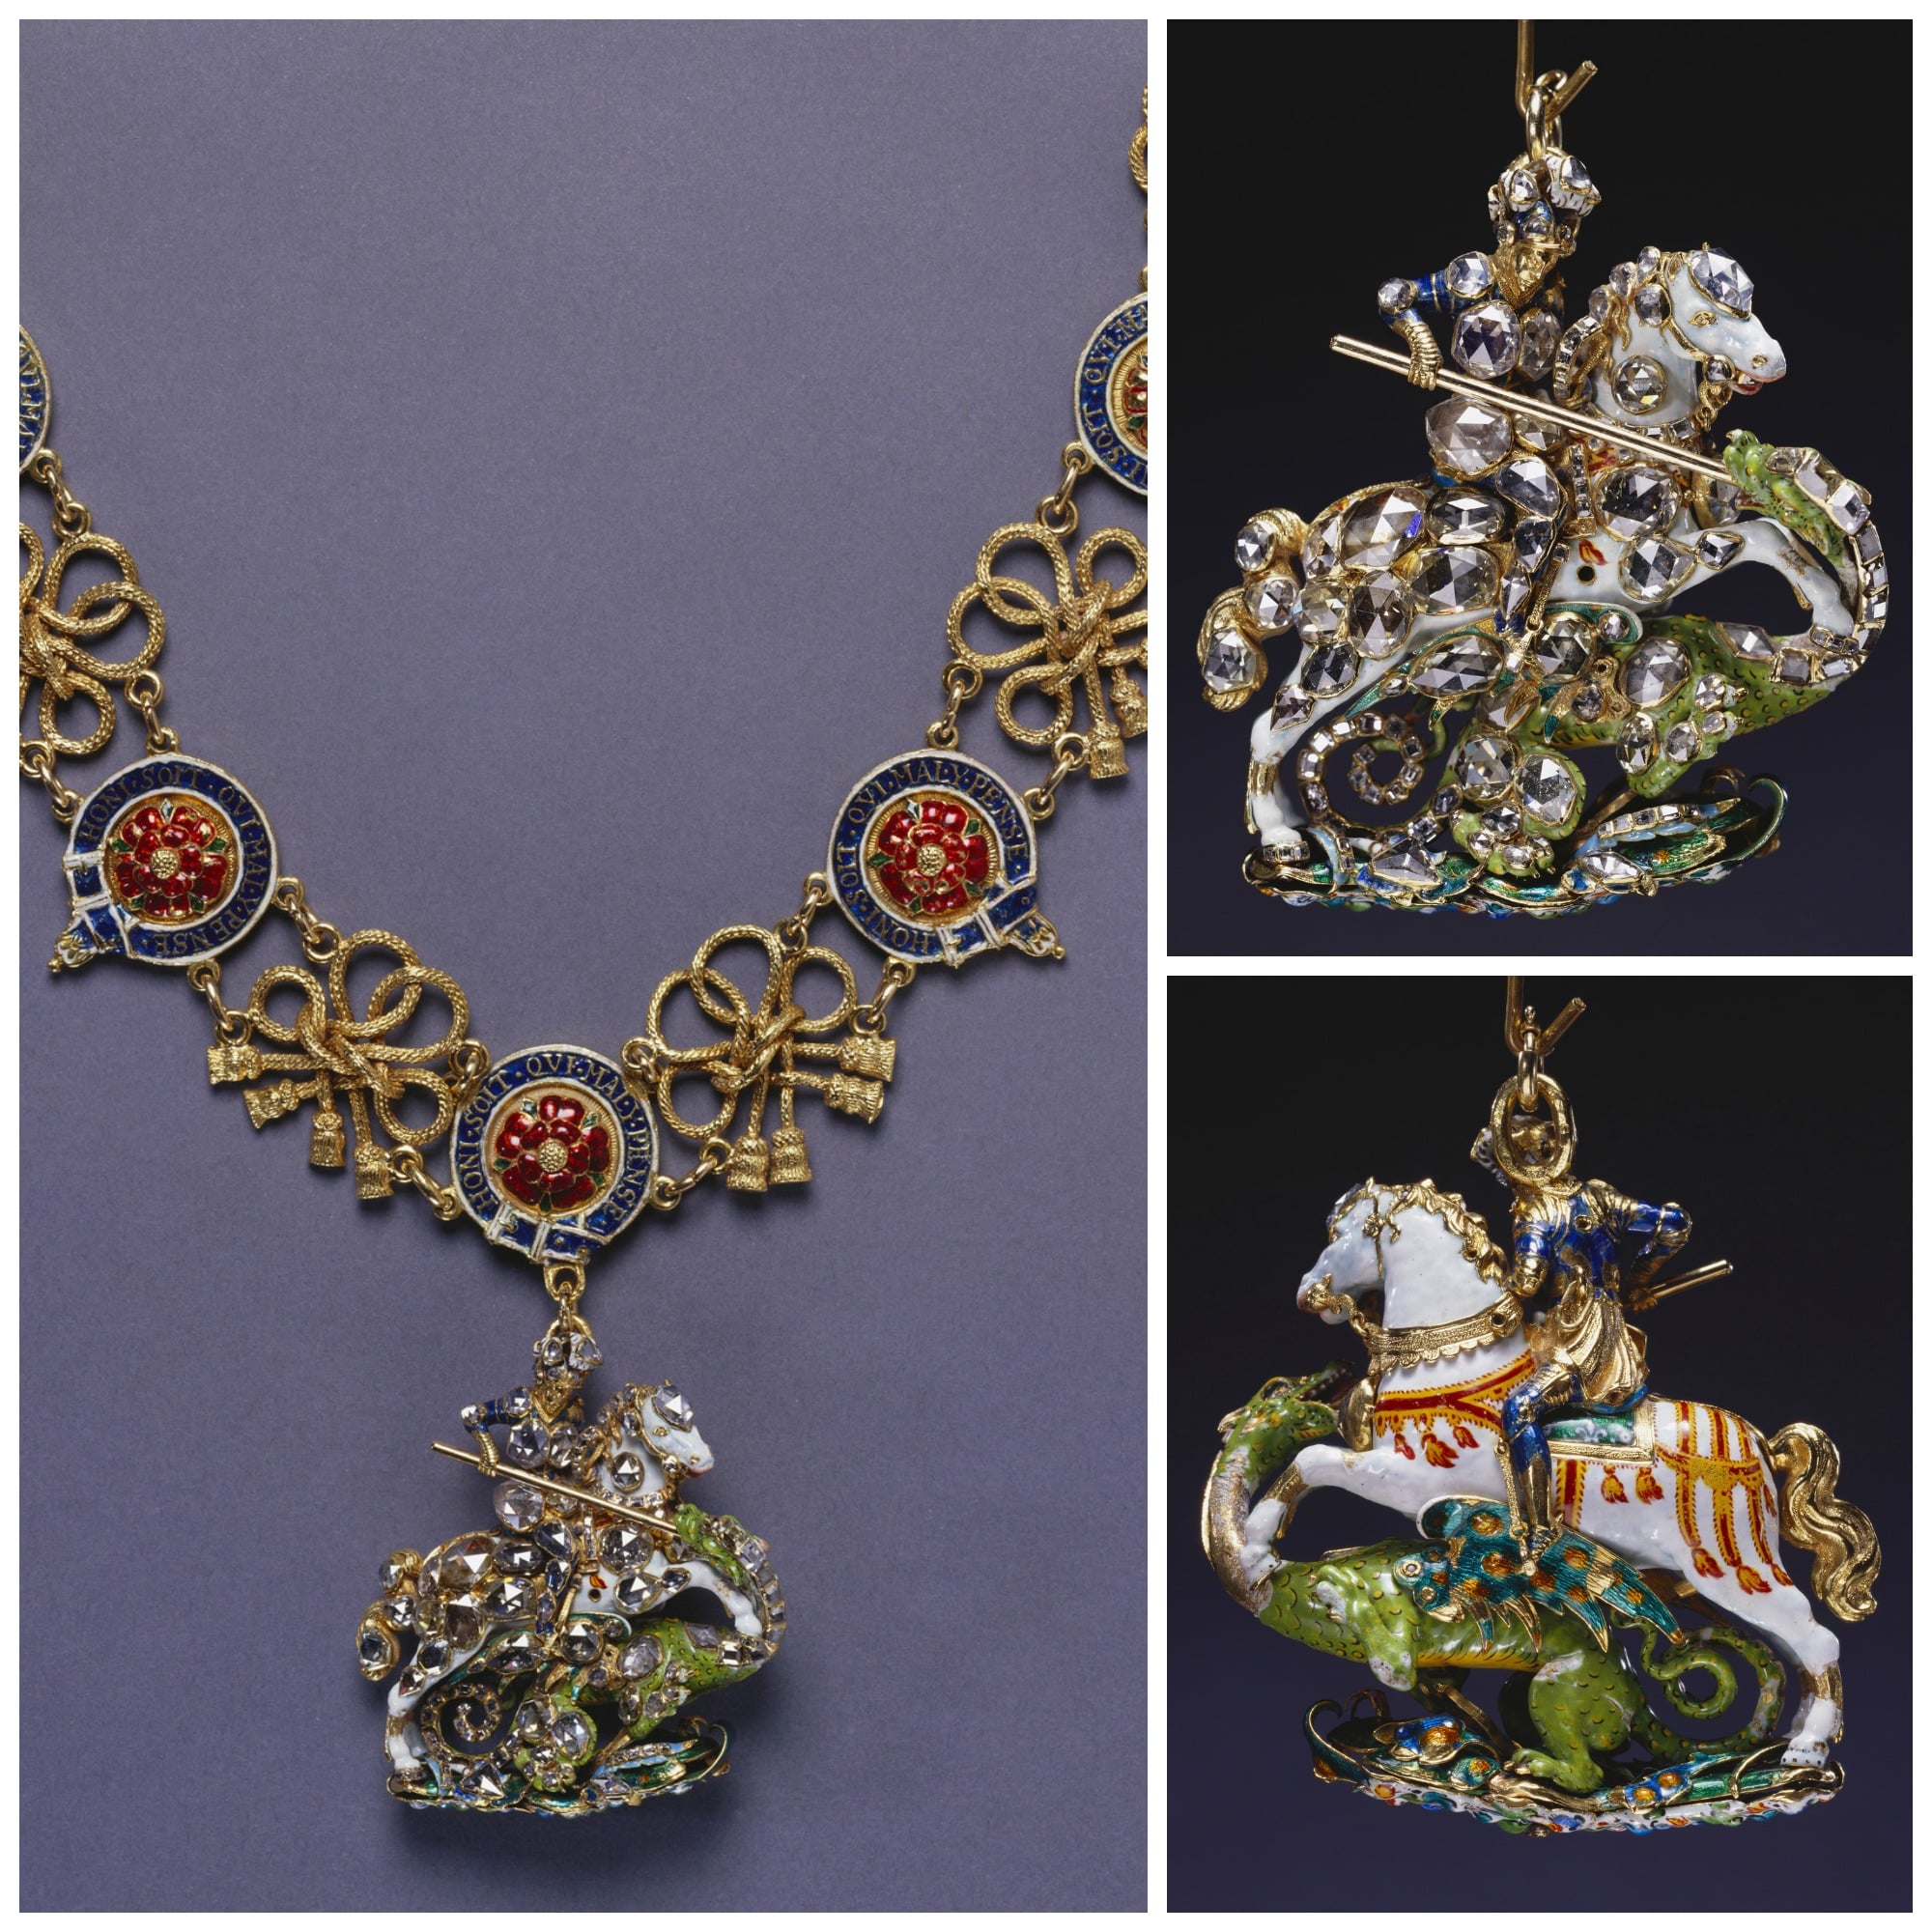 Great George Crafted by Royal Goldsmith, Robert Vyner, for Charles II in 1661, Suspended from Collar Reportedly Made for James II, c.1685. Royal Collection Trust/© Her Majesty Queen Elizabeth II 2014.